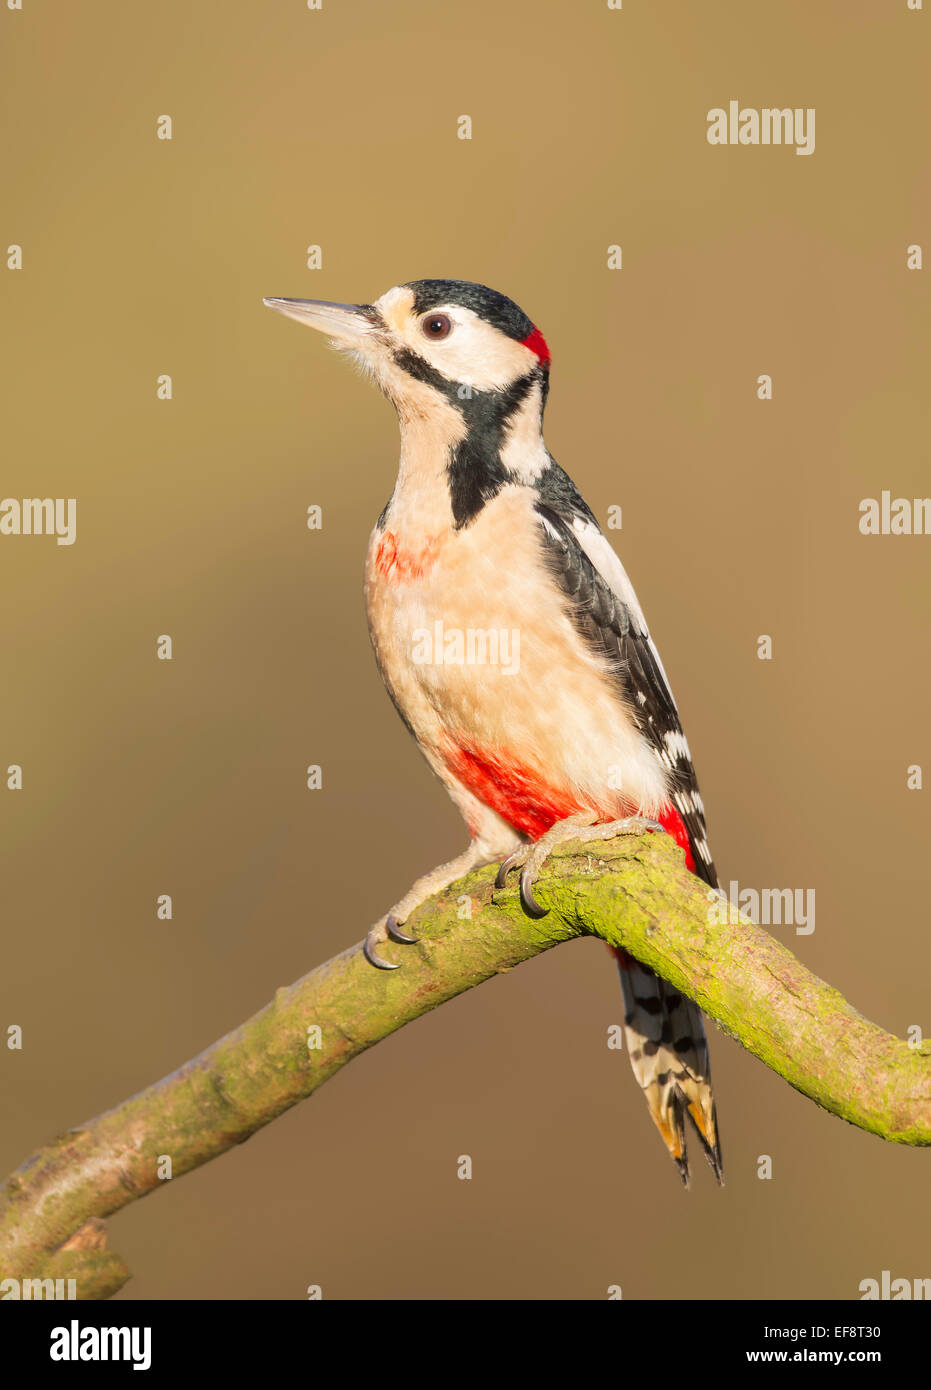 UK, Wild Great Spotted Woodpecker on branch Stock Photo